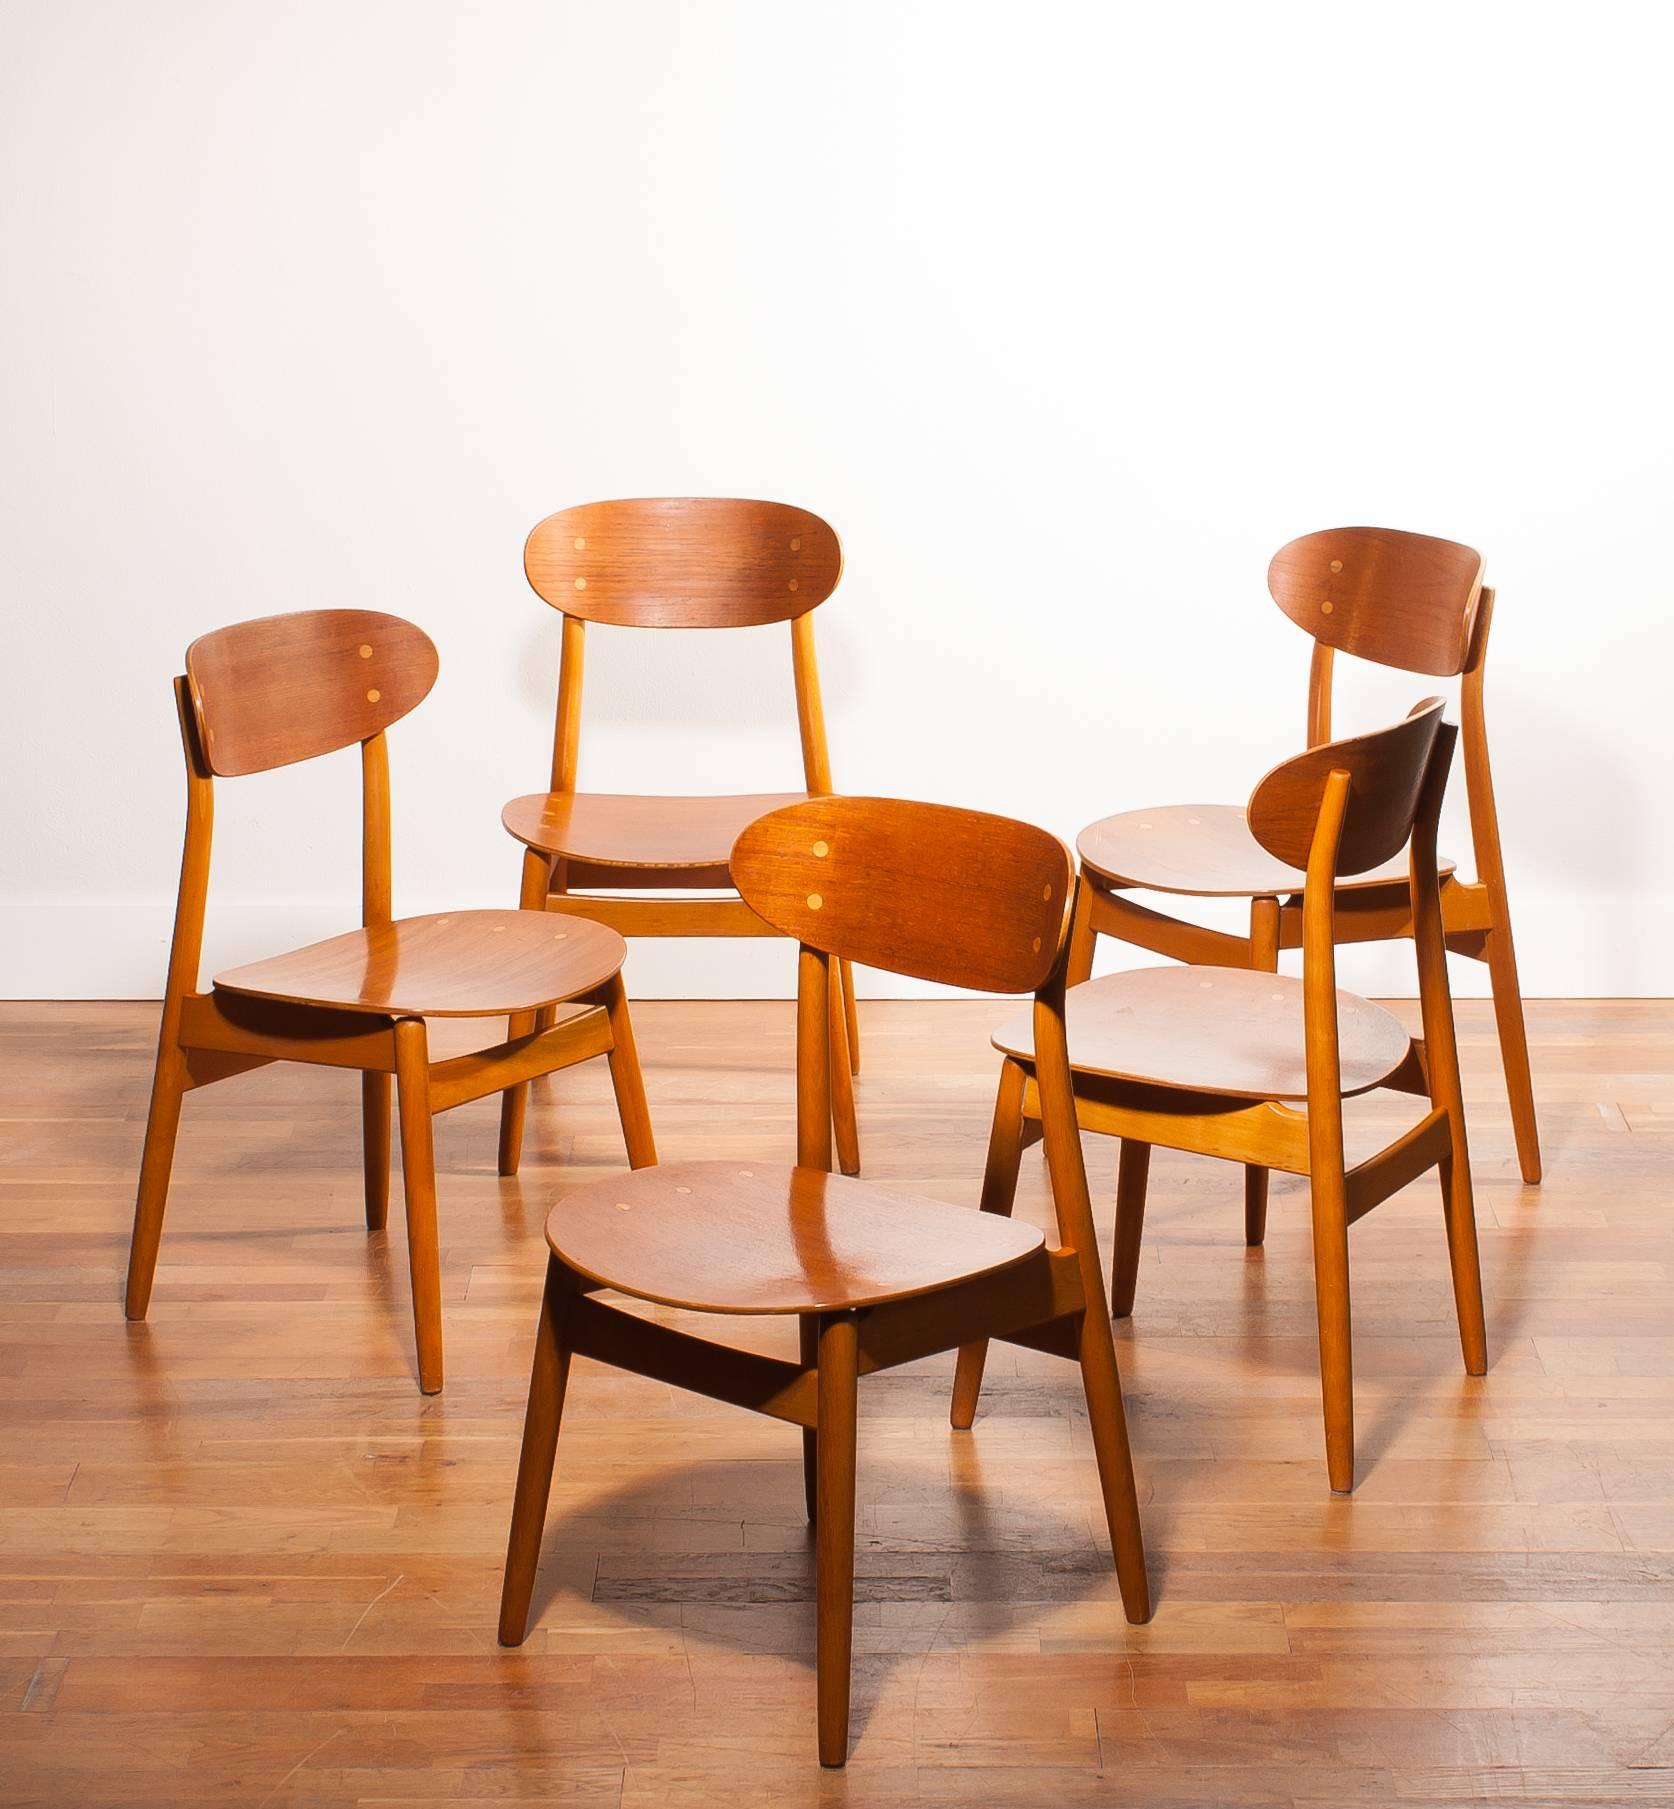 A very nice set of five dining chairs designed by Alf Svensson for Hogafors Stolfabrik, Denmark (marked)
The chairs are made of a teak seating and backrest on a beech frame.
They are in a beautiful condition.
Period 1950s
Dimensions: H. 82 cm, W. 46